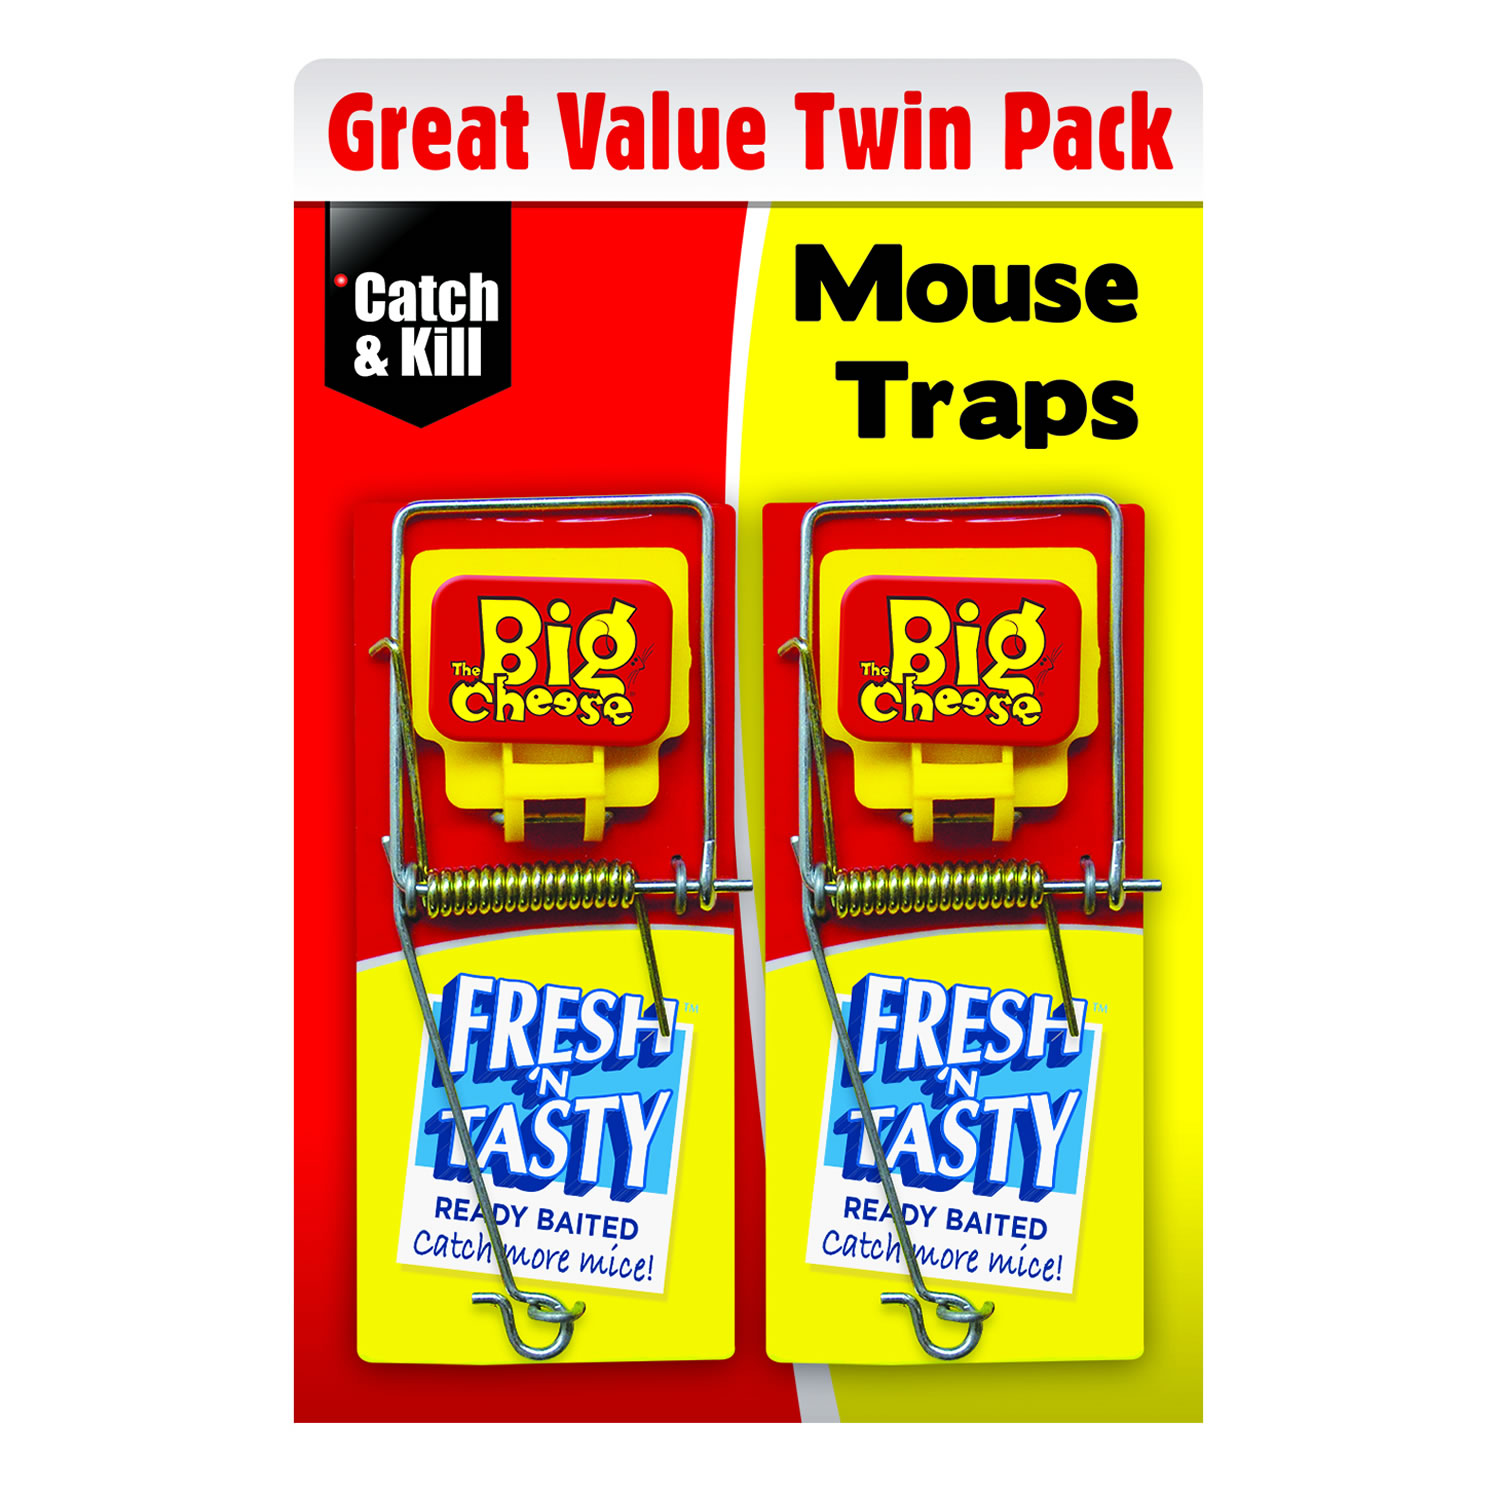 THE BIG CHEESE FRESH N TASTY BAITED MOUSE TRAP TWIN PACK